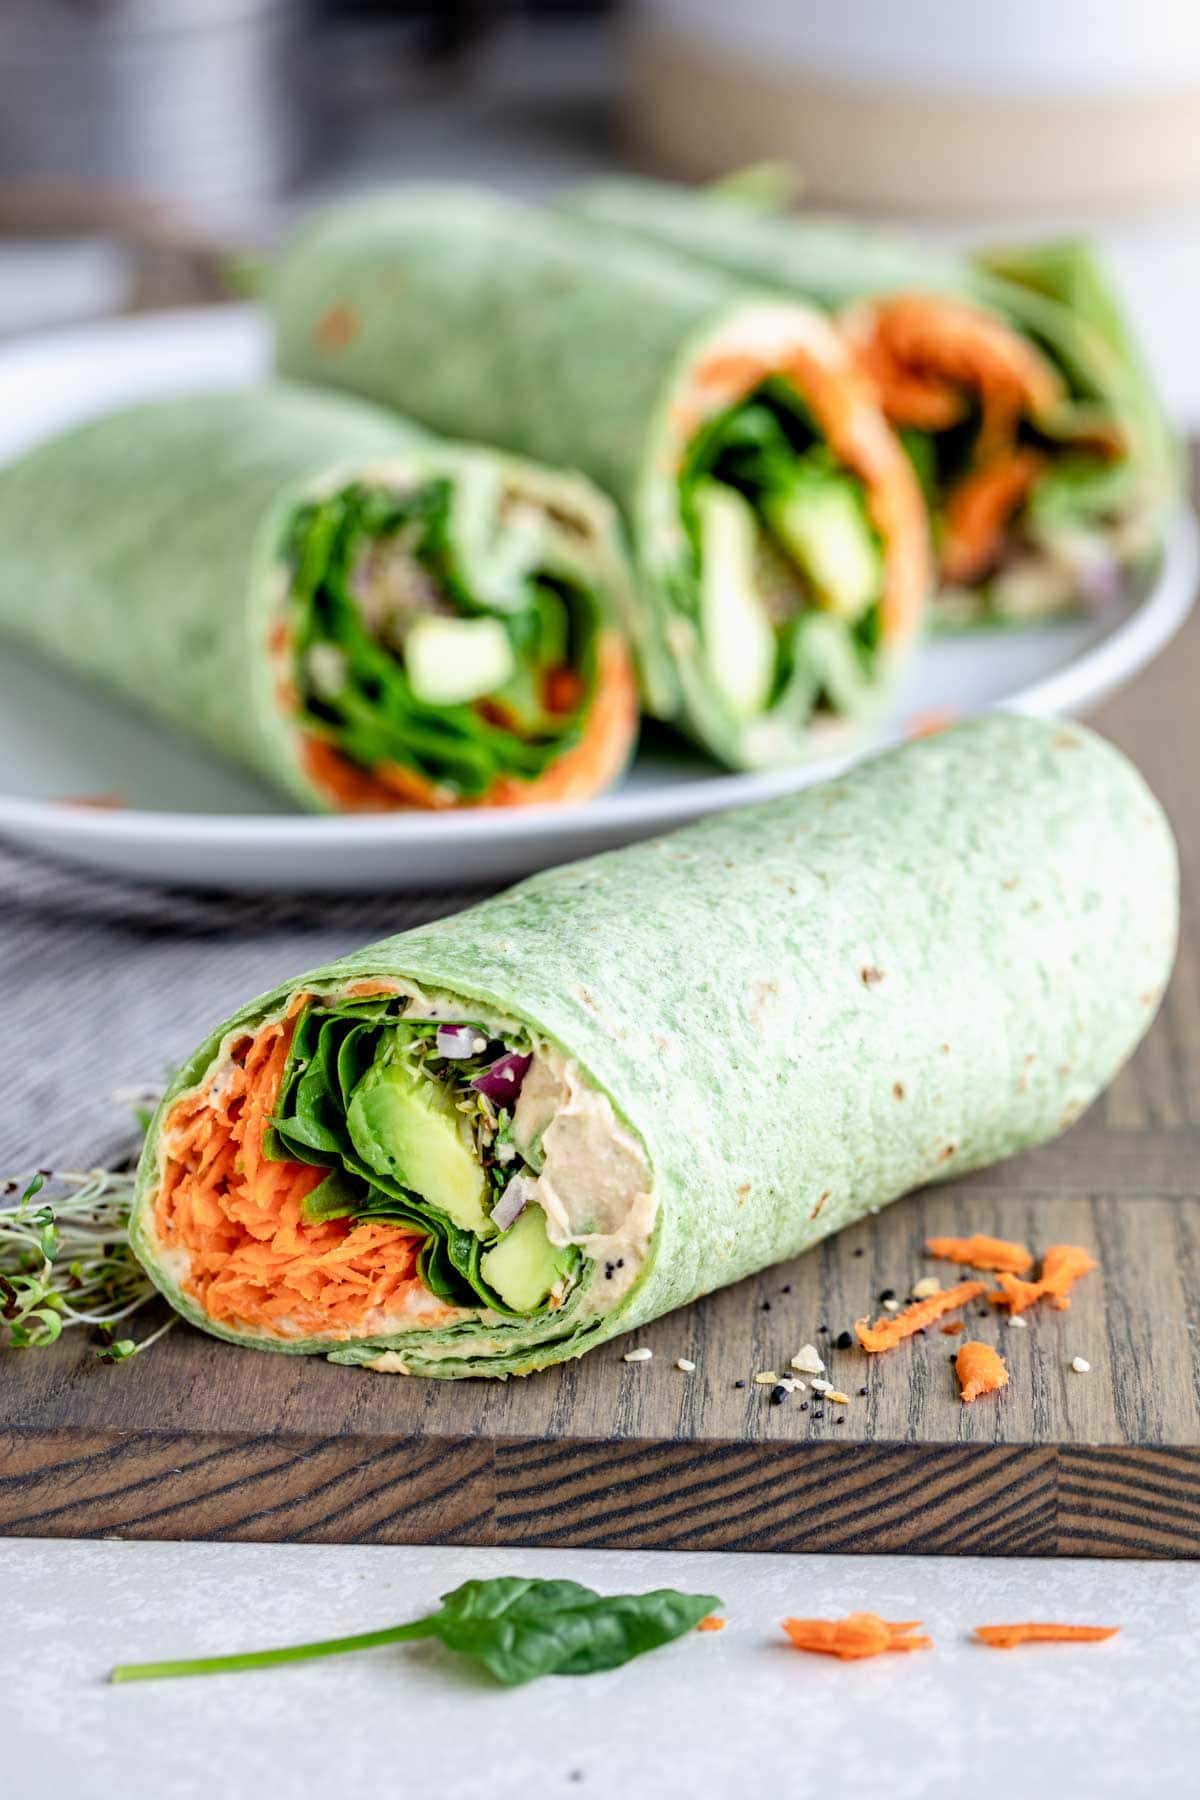 Homemade spinach wrap with hummus, avocados and carrots